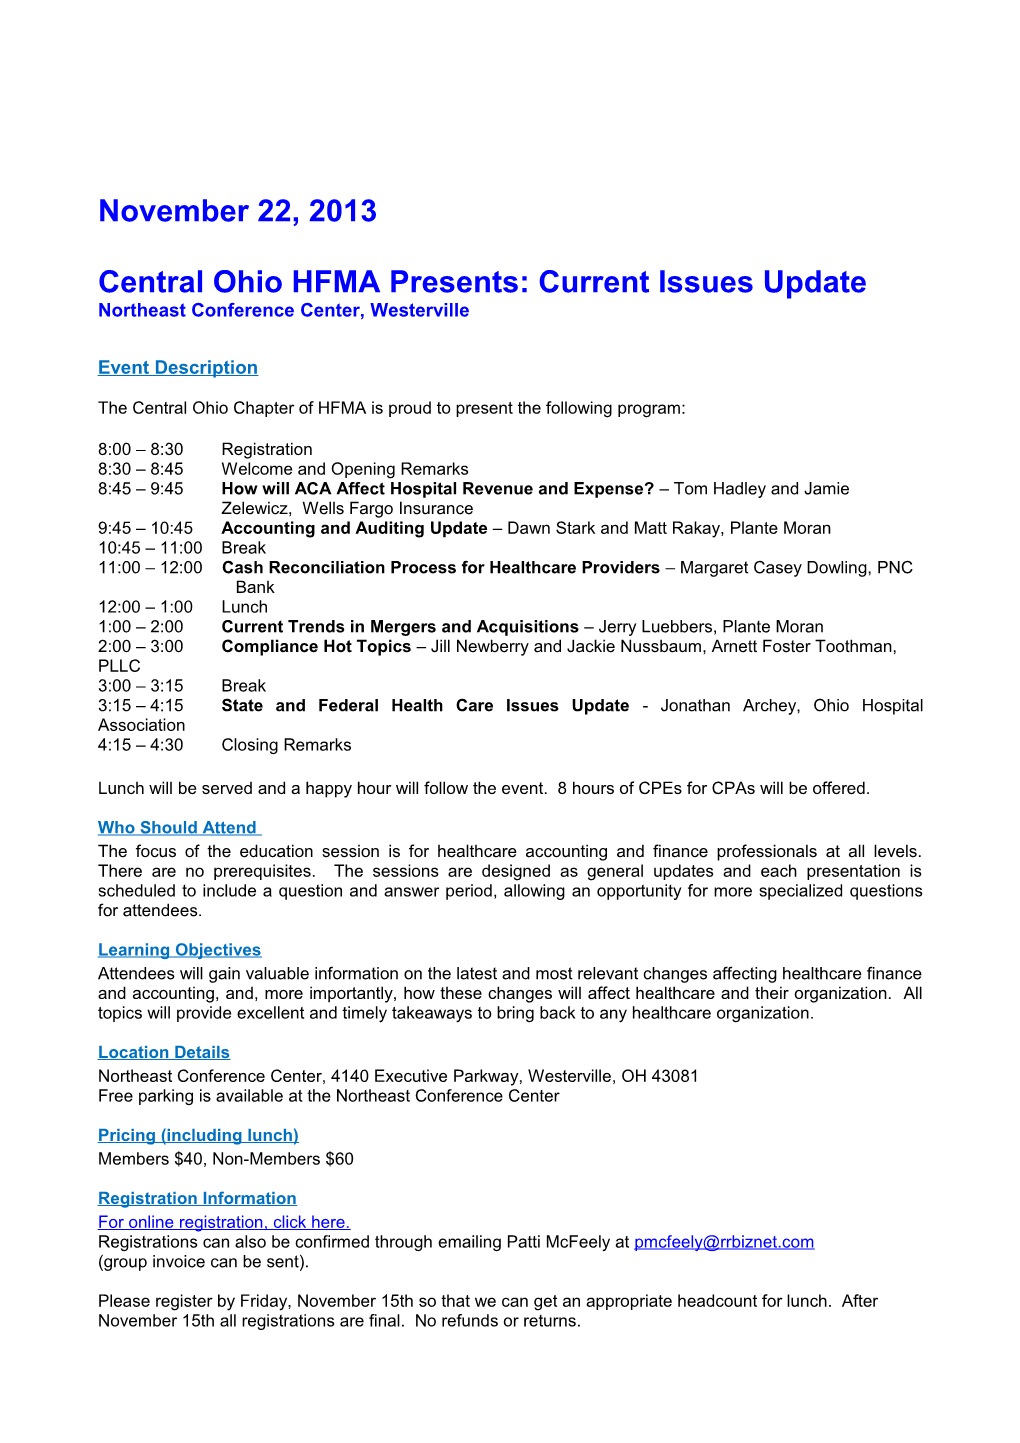 Central Ohio Chapter of HFMA